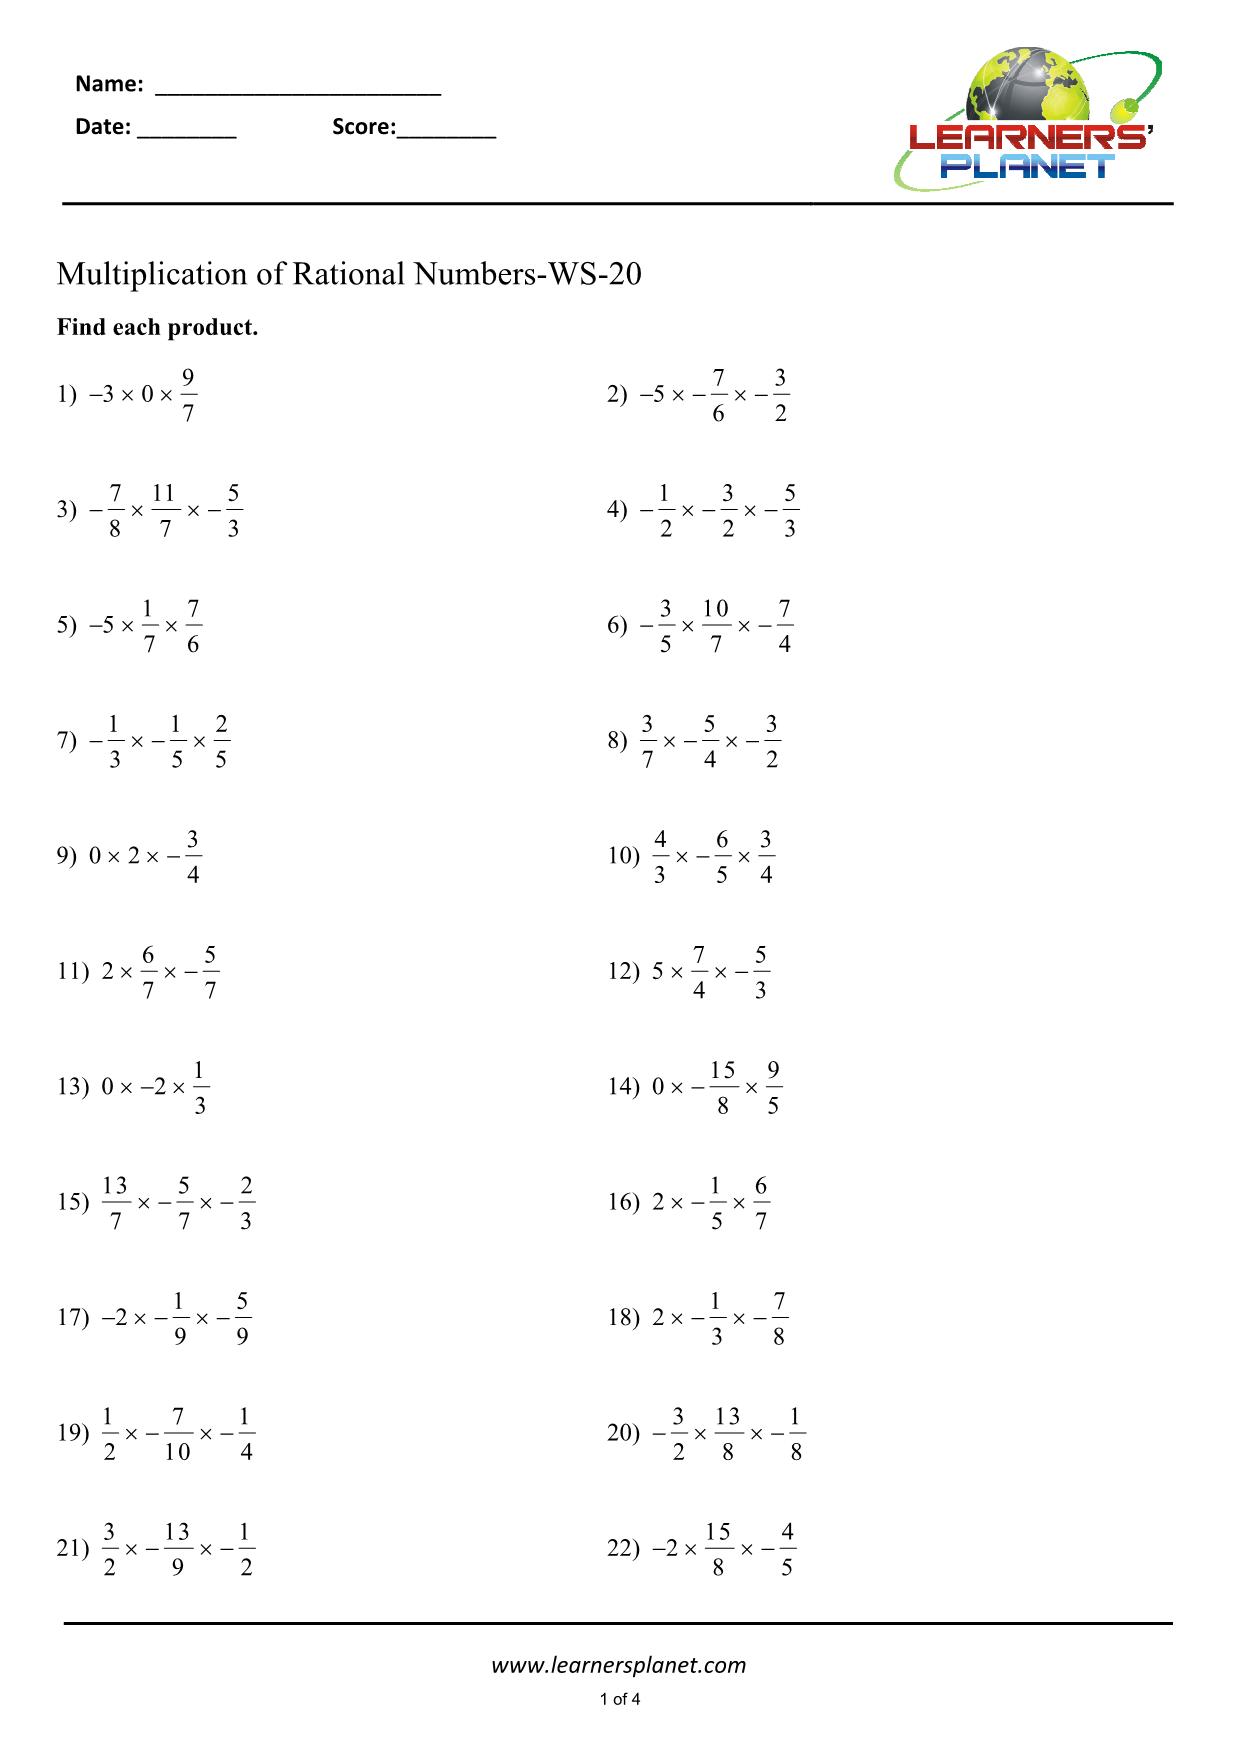 Multiplying rational numbers worksheets maths grade 24 Within Multiplying Rational Numbers Worksheet